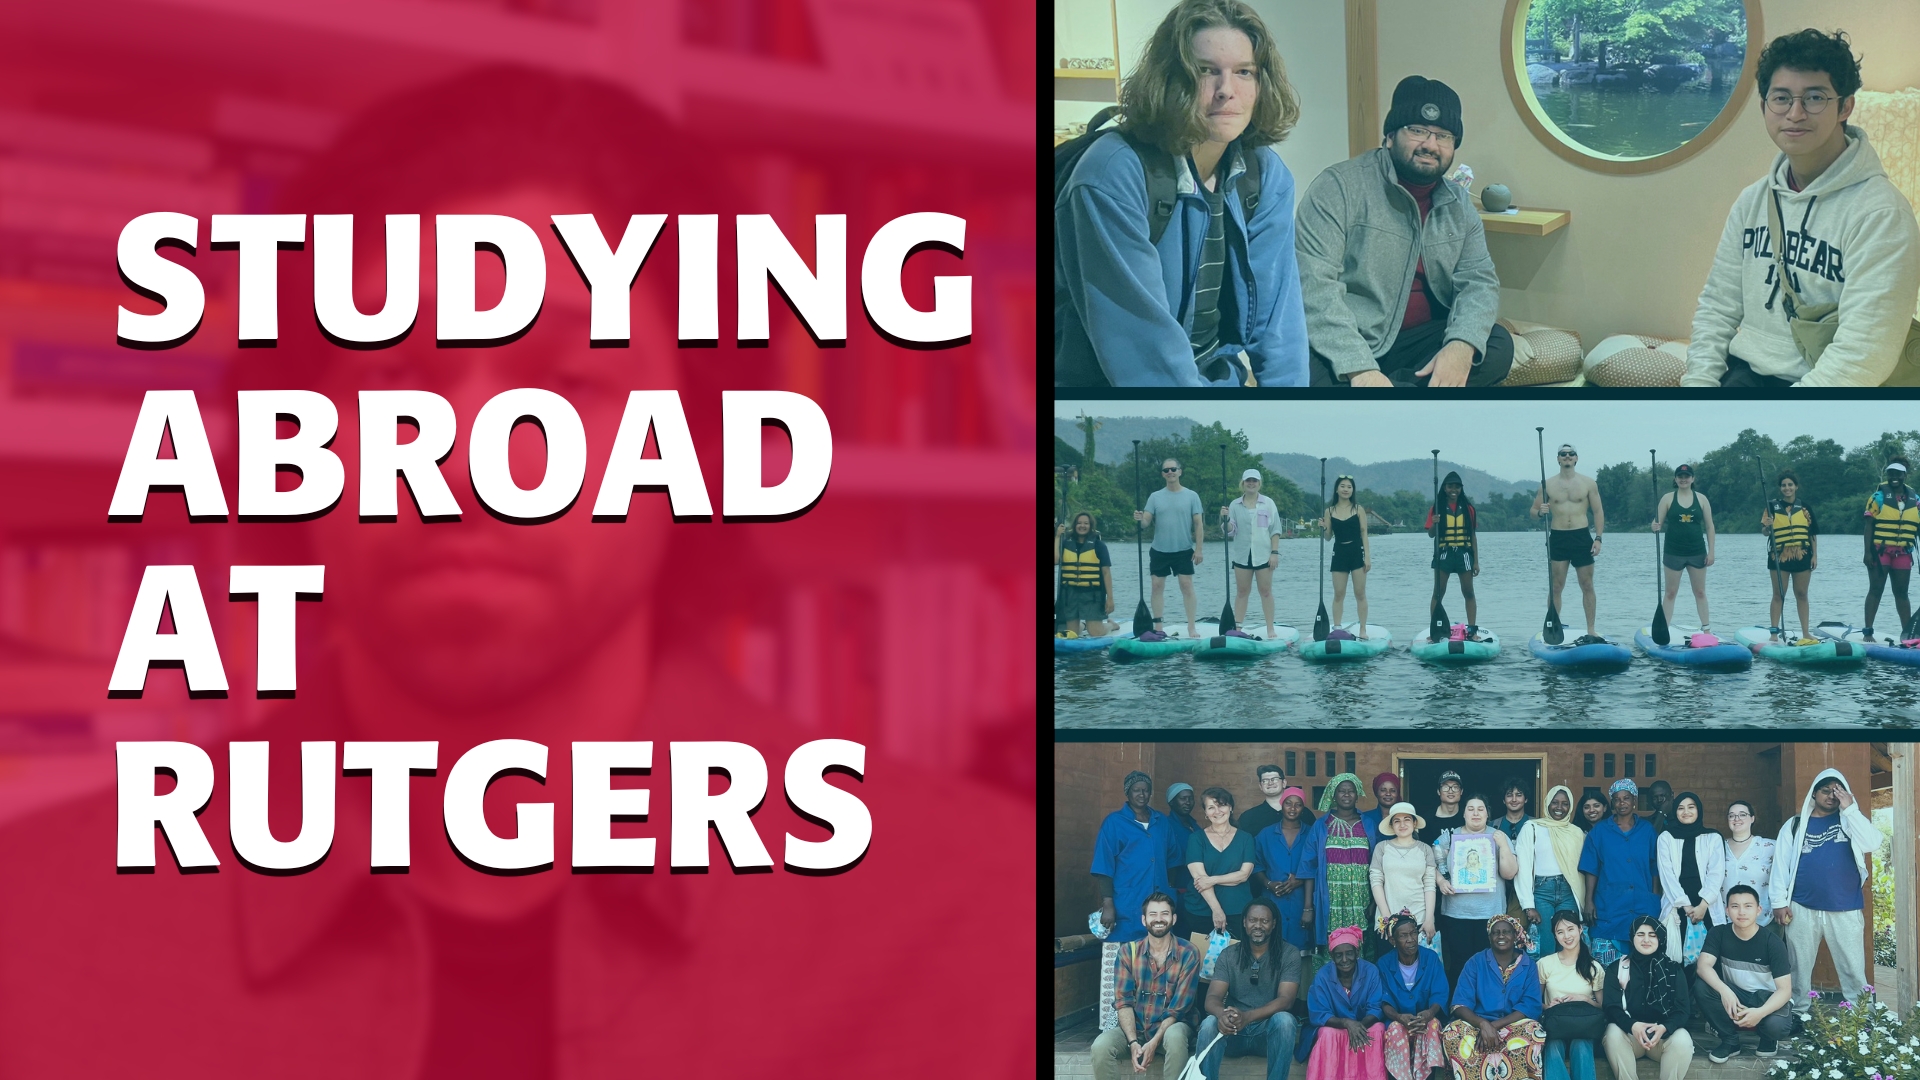 Rutgers Global - Studying Abroad at Rutgers